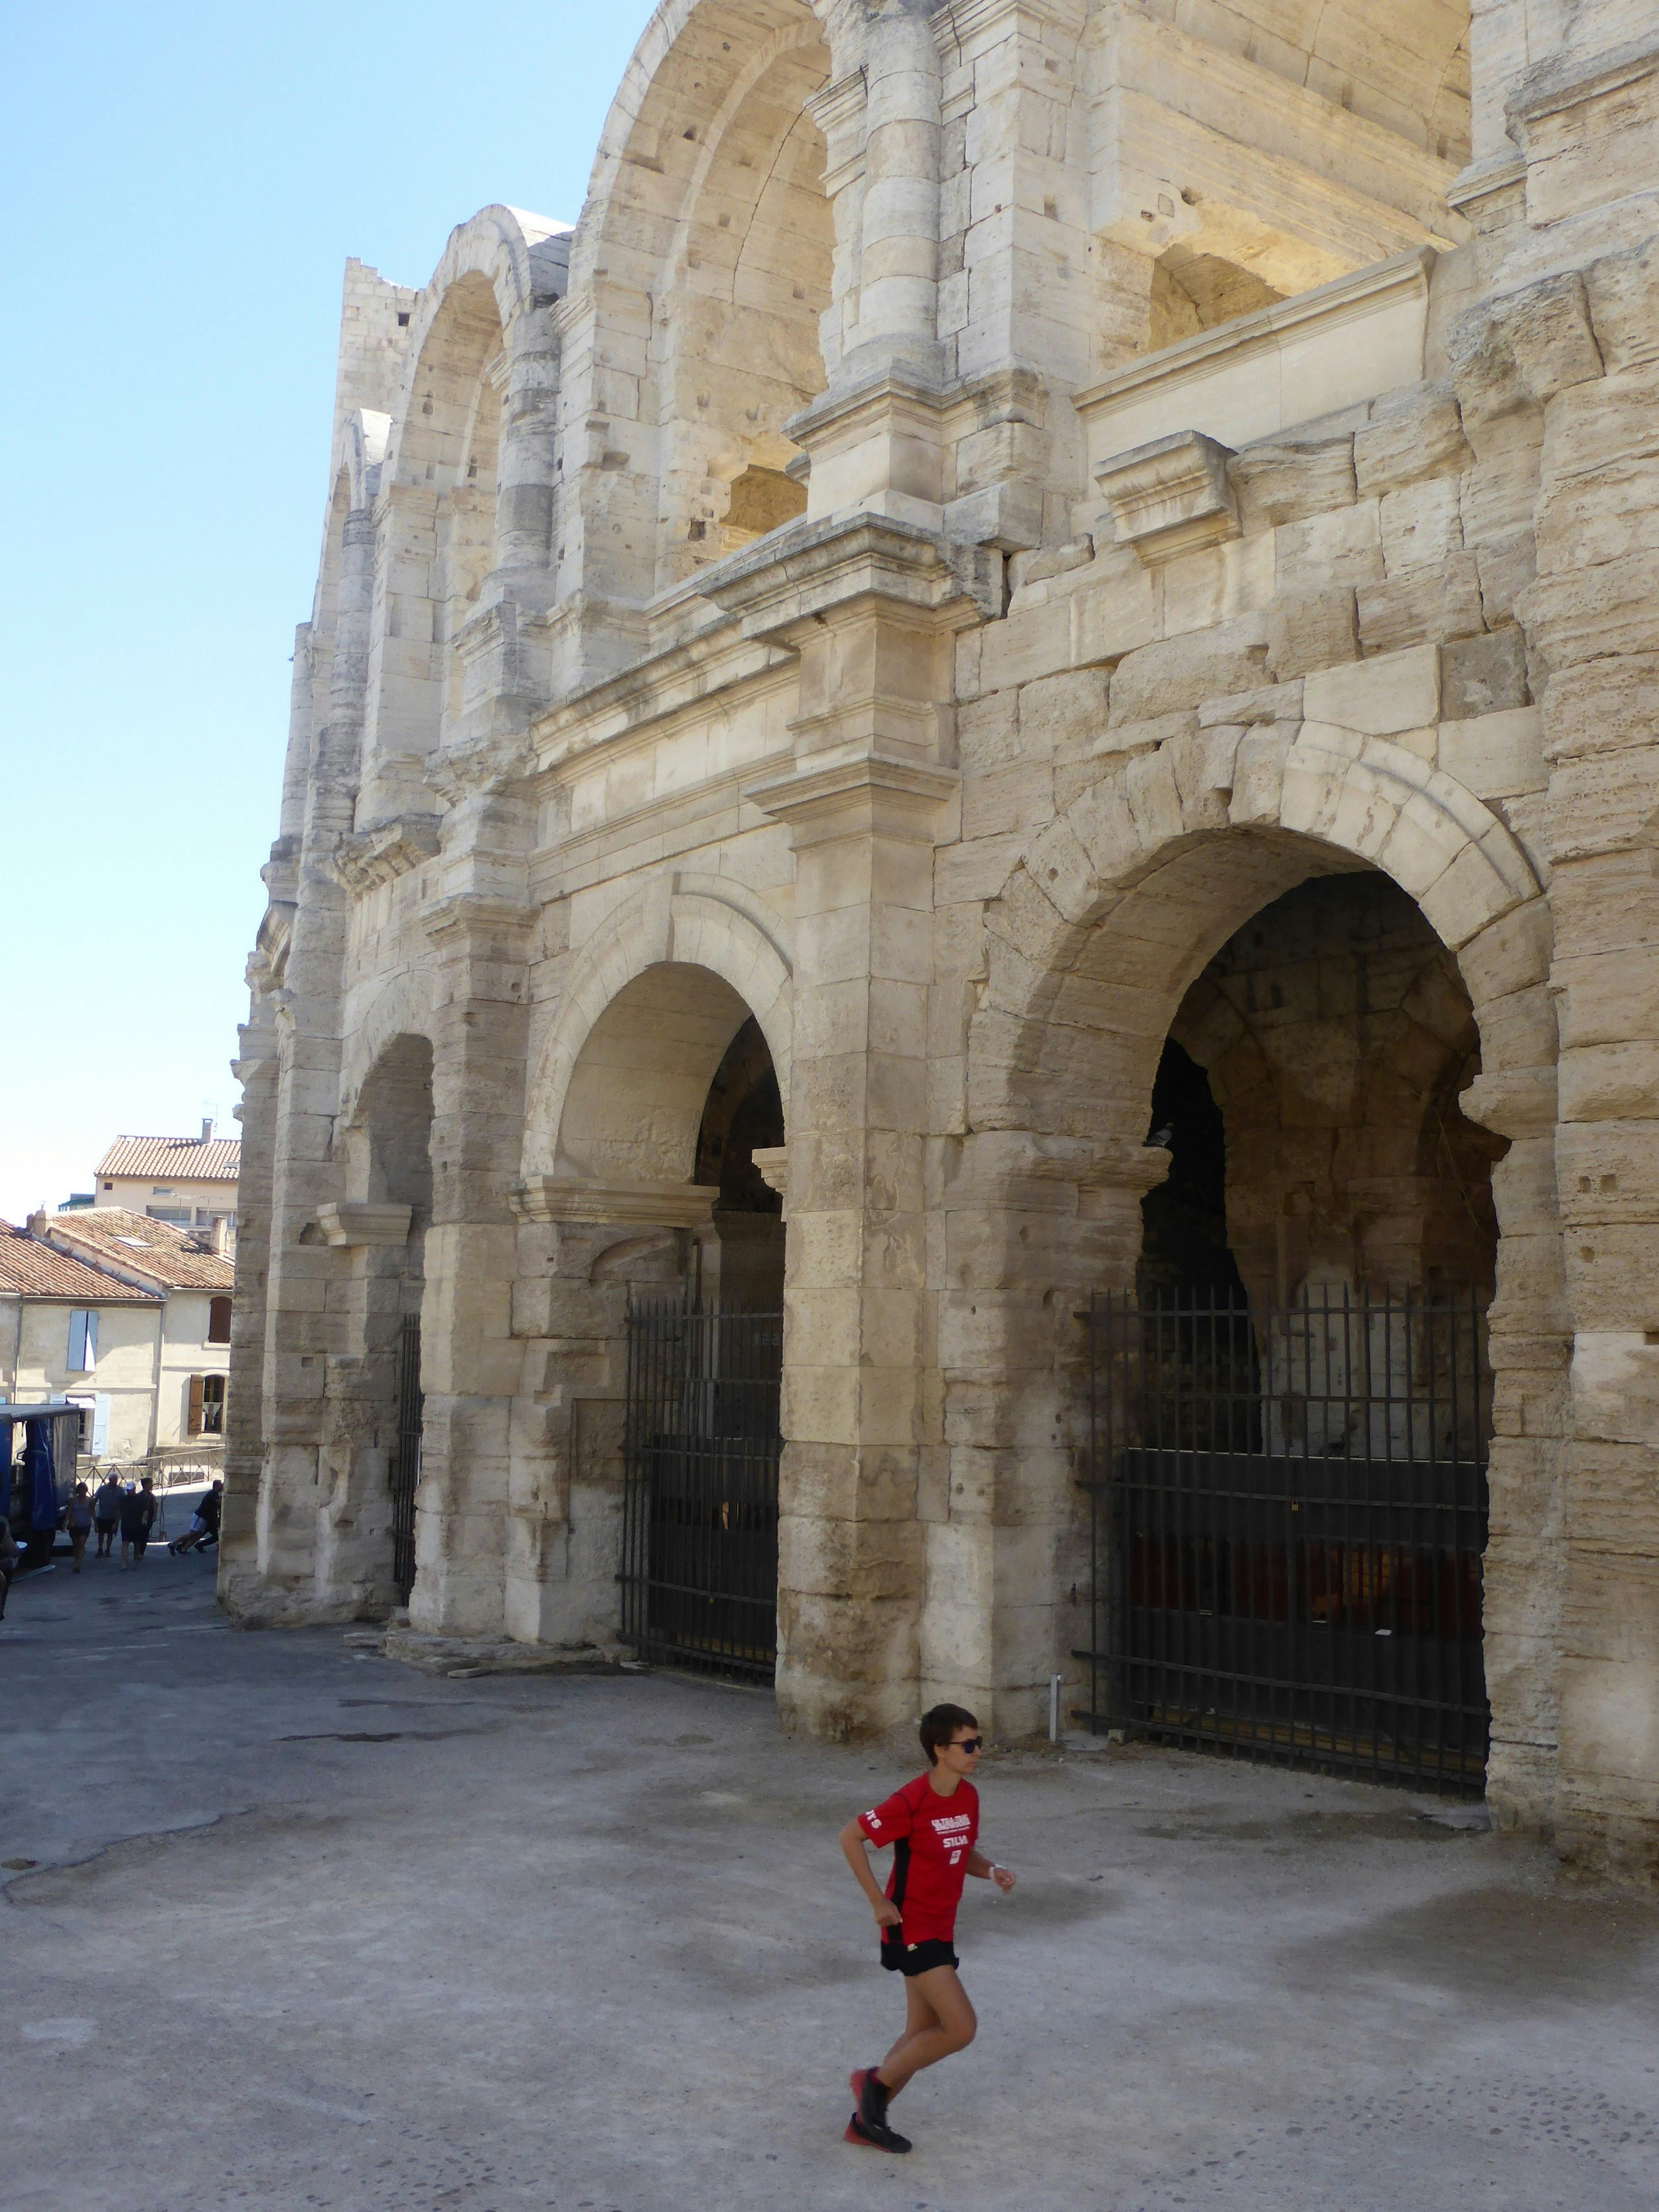 Alecsa running past the Roman amphitheatre in Arles; it's golden stone resembles the Colosseum in Rome.